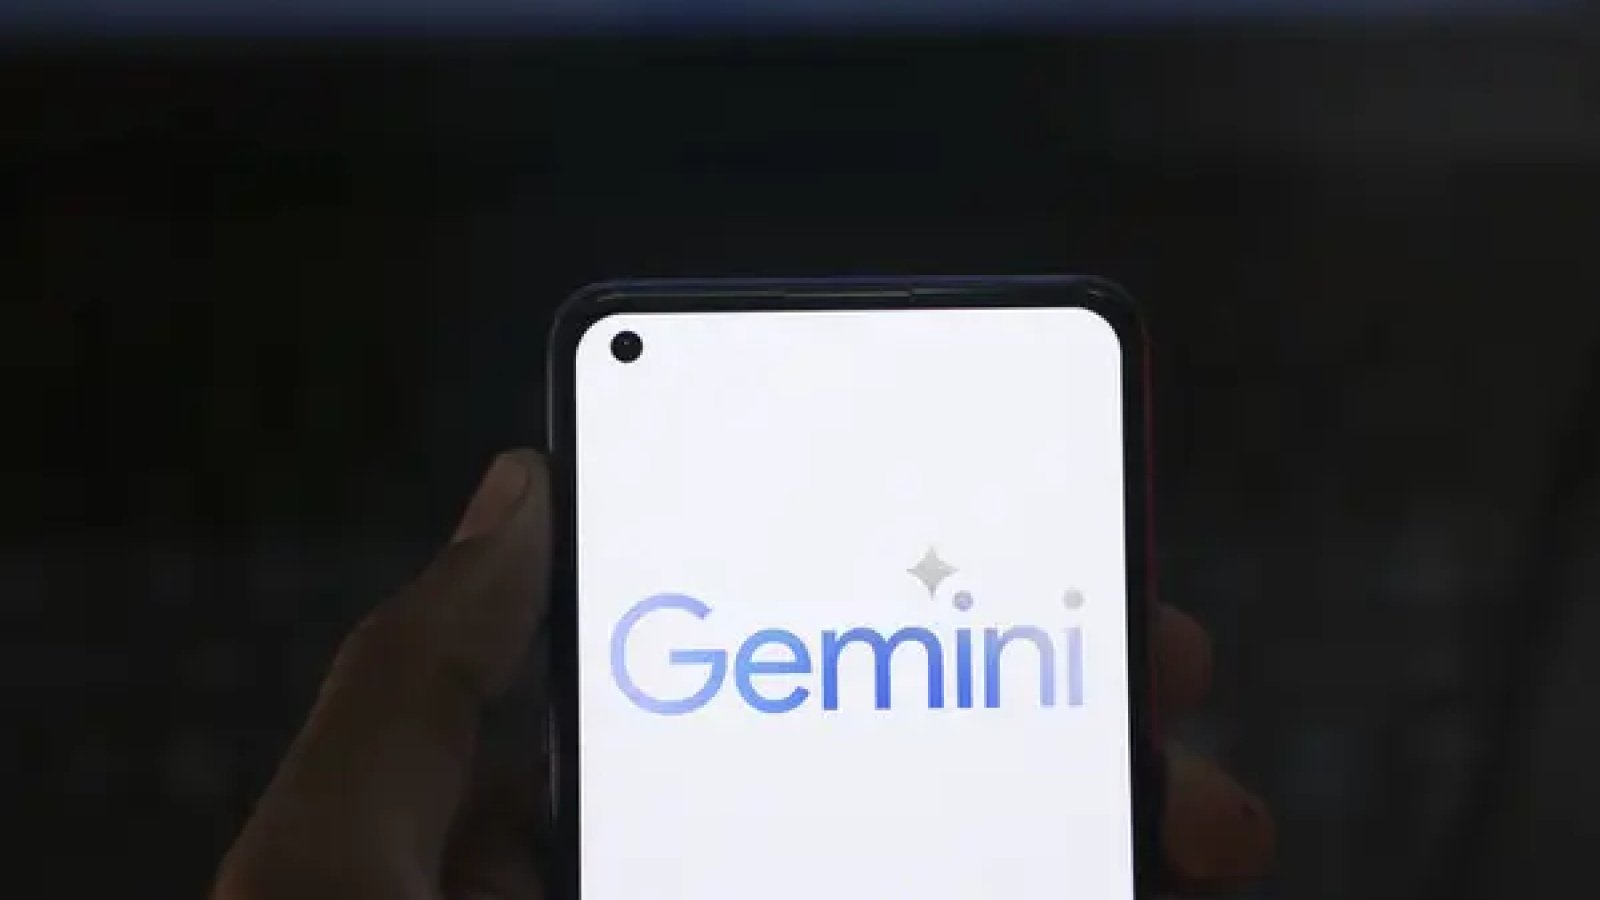 Gemini can now answer common questions on the locked Android screen